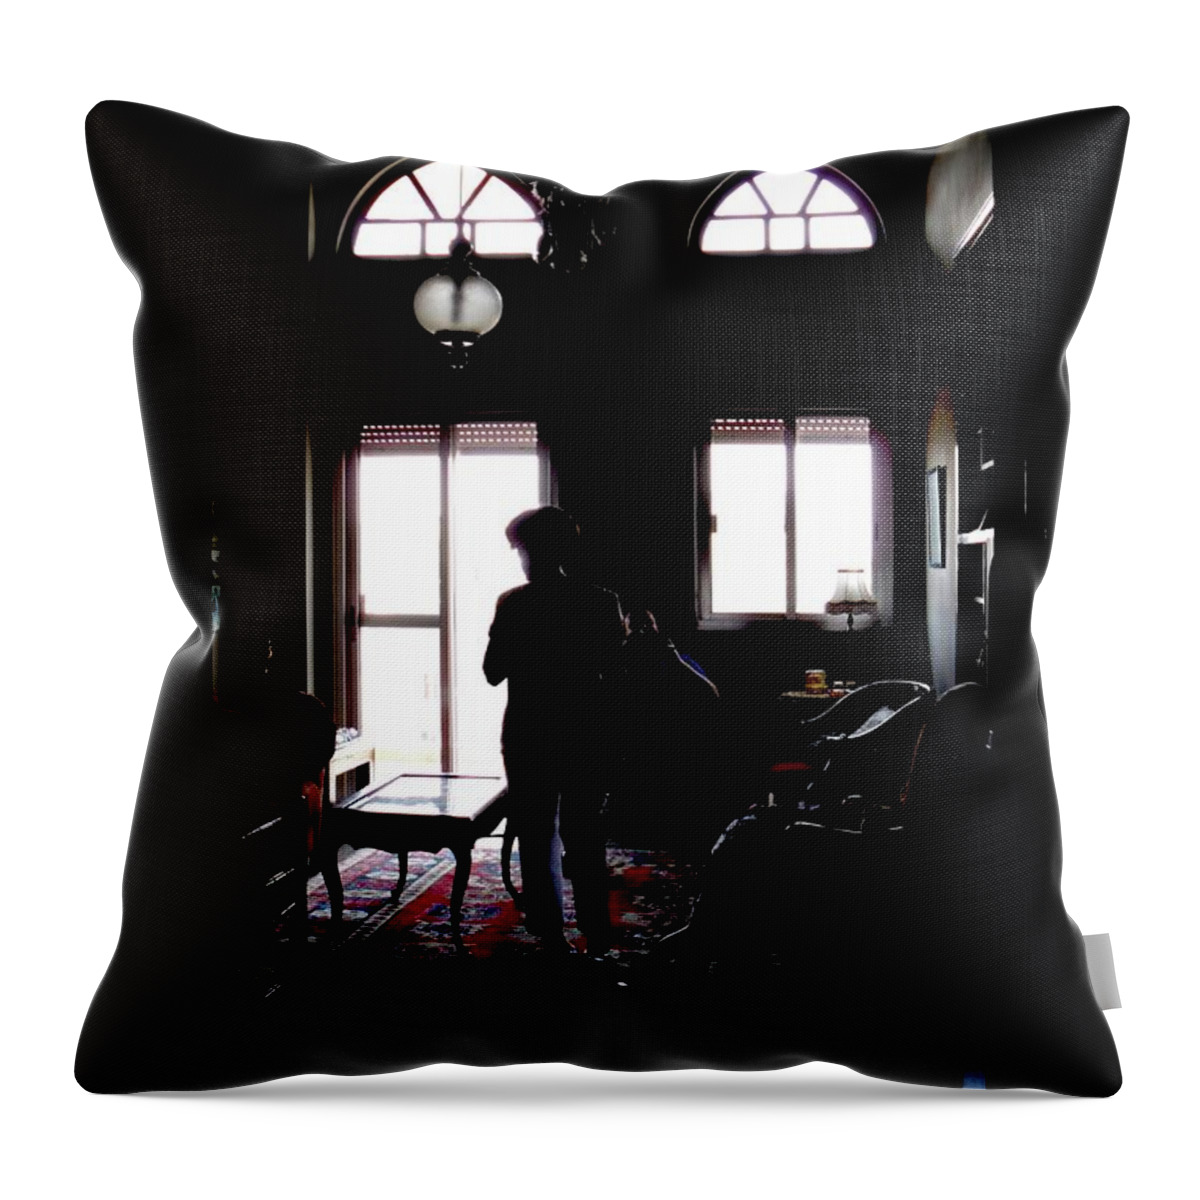 Shadows Throw Pillow featuring the photograph In The Shadows by Marwan George Khoury